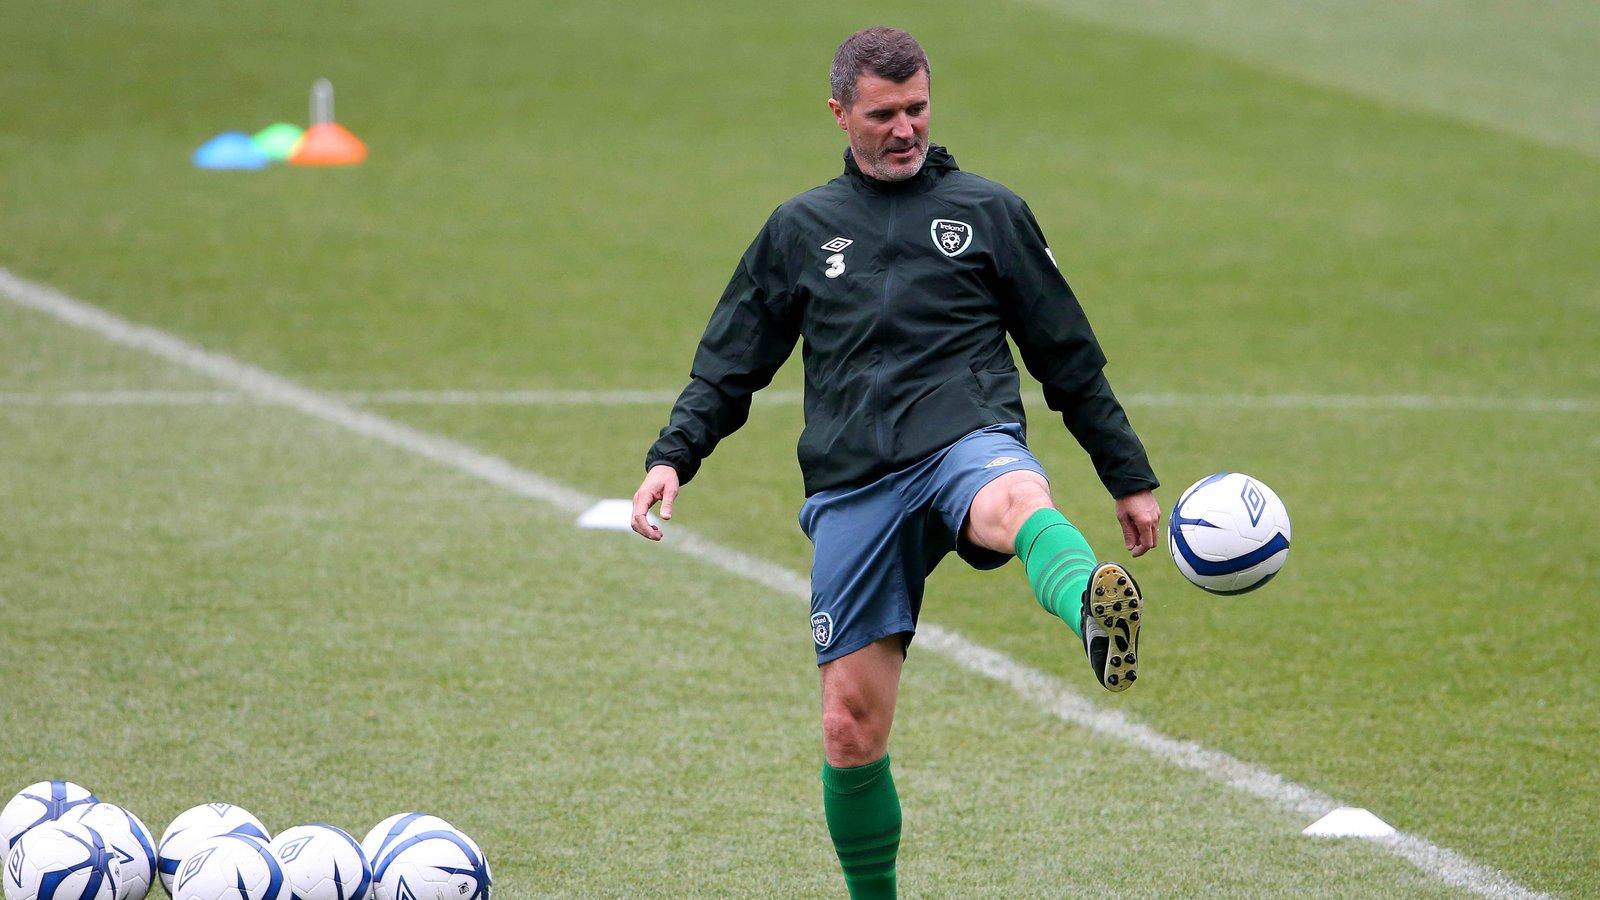 Keane confirmed as Villa assistant manager